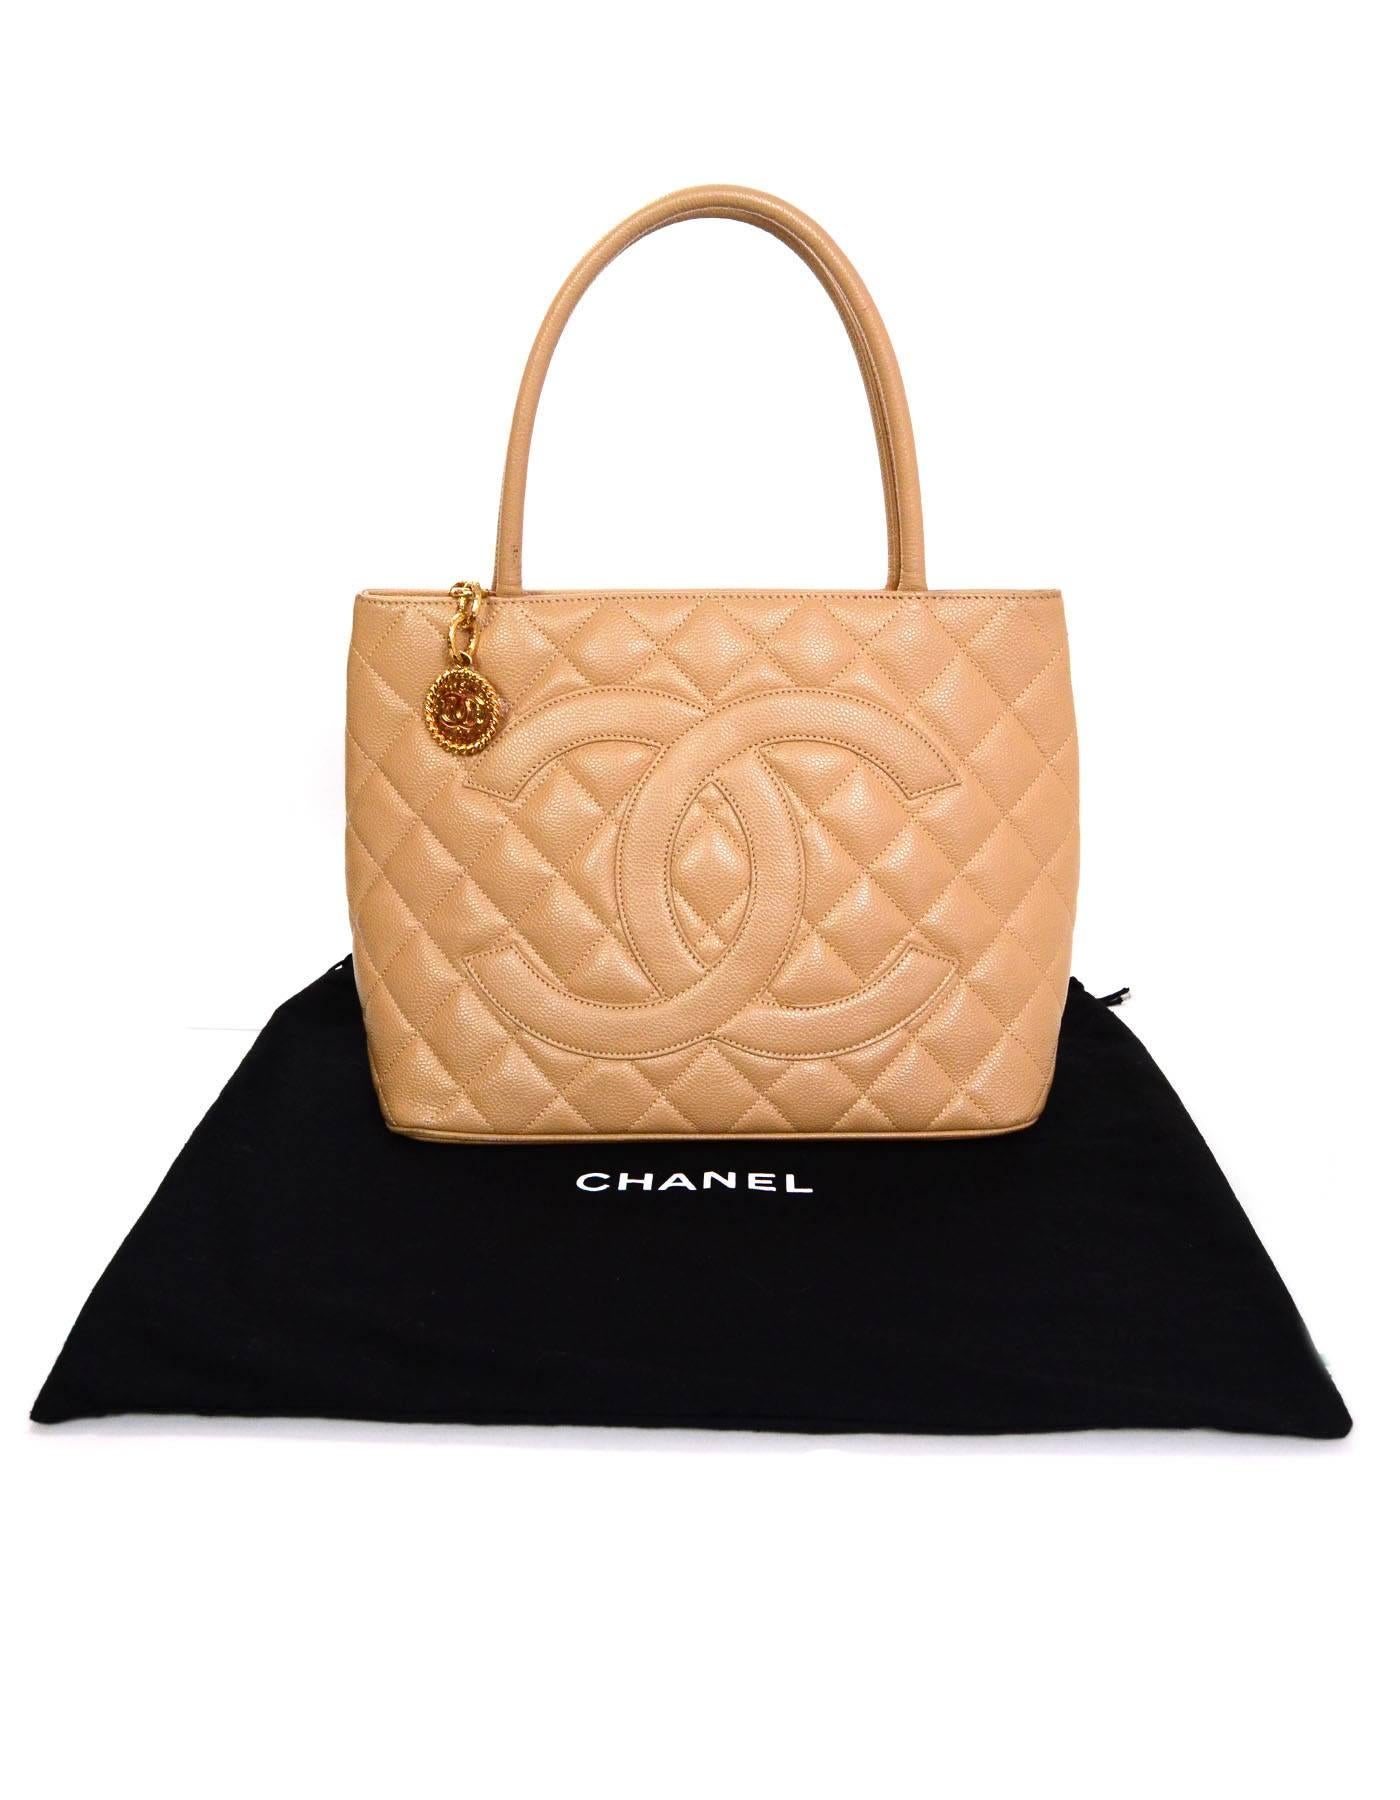 Chanel Beige Caviar Leather Medallion Tote Bag 5